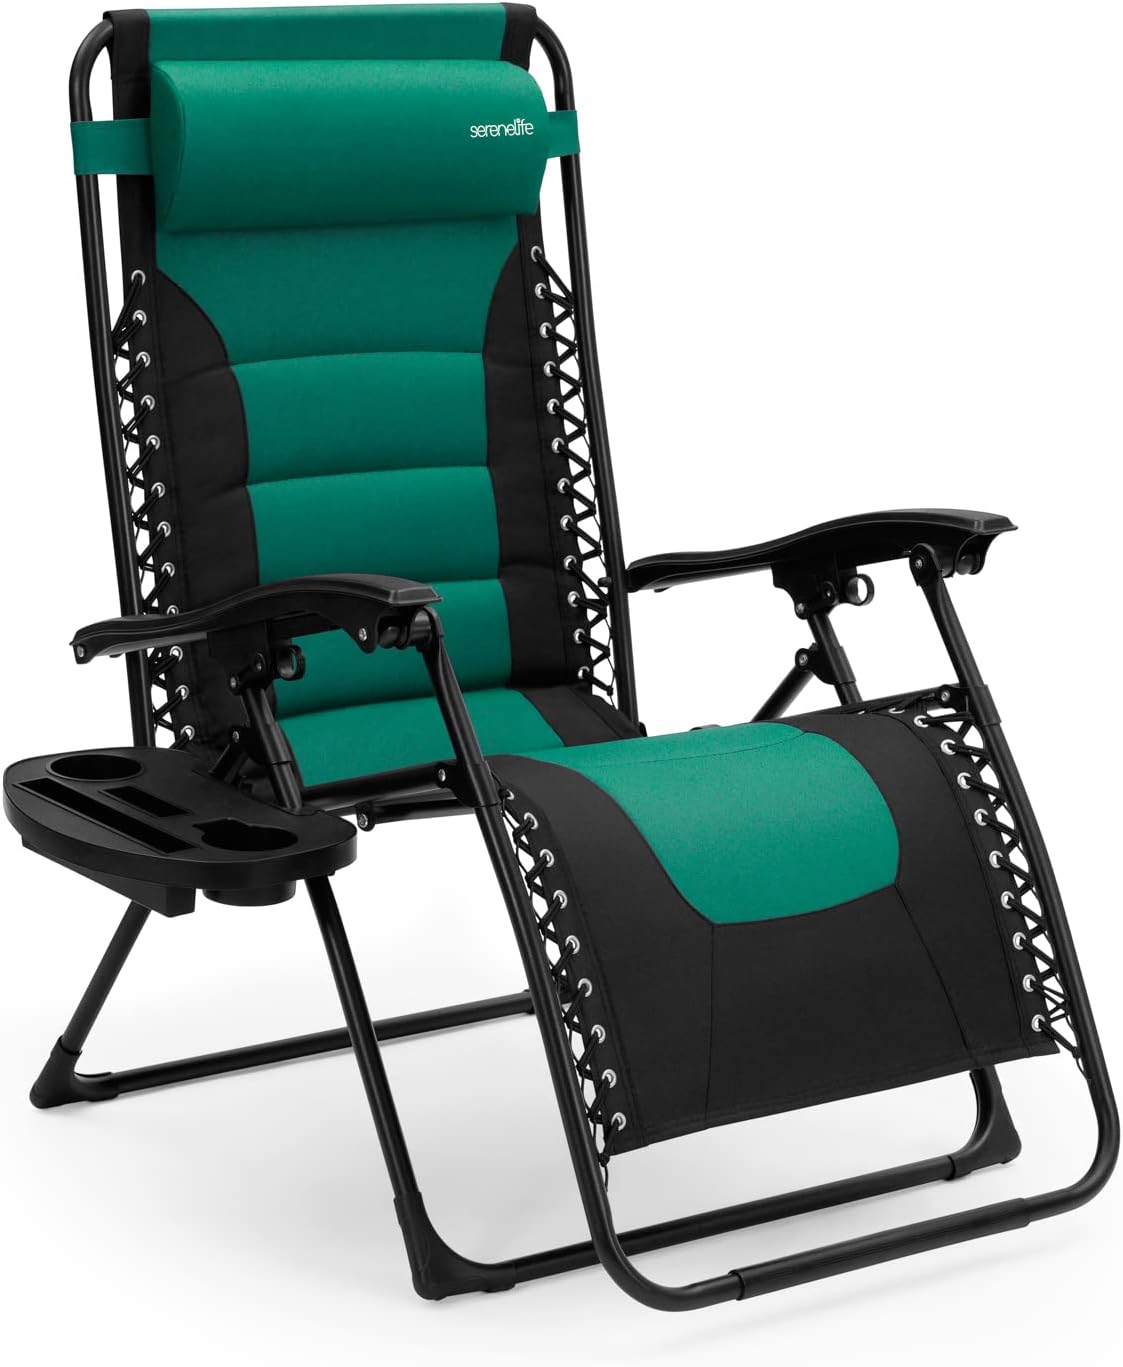 SereneLife Foldable Outdoor Zero Gravity Padded Lawn Chair, Adjustable Steel Mesh Recliners, w/Removable Pillows and Cup Holder Side Tables,, Green and Black